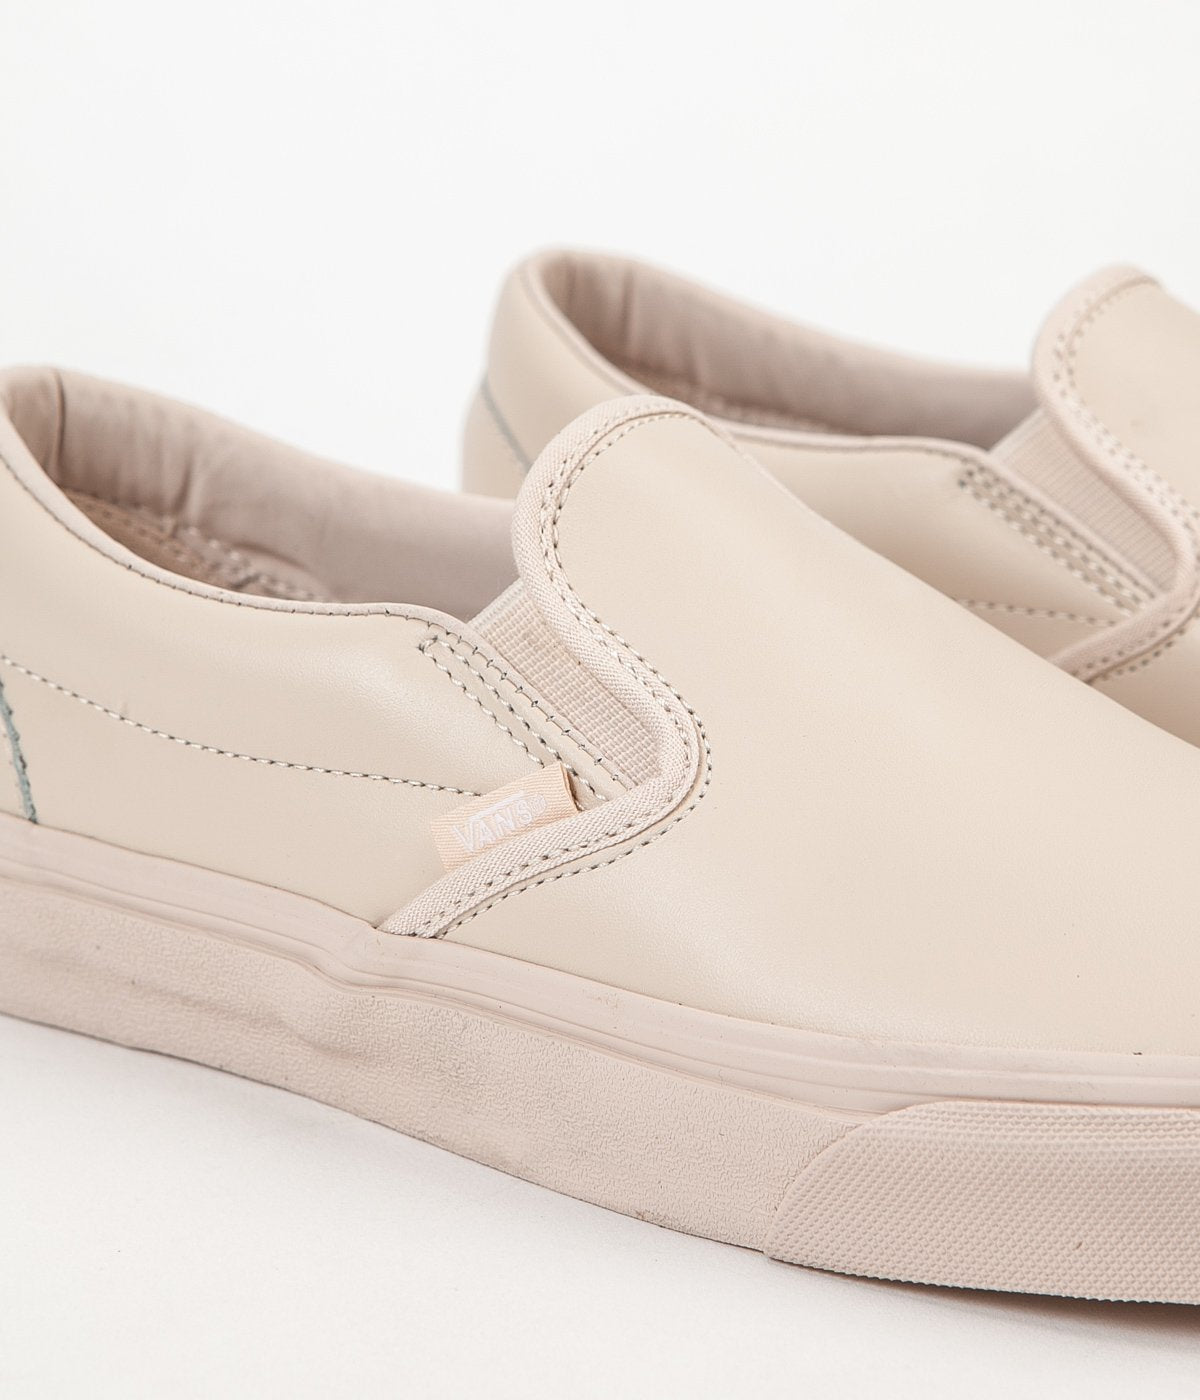 Vans Classic Slip On Leather Shoes 